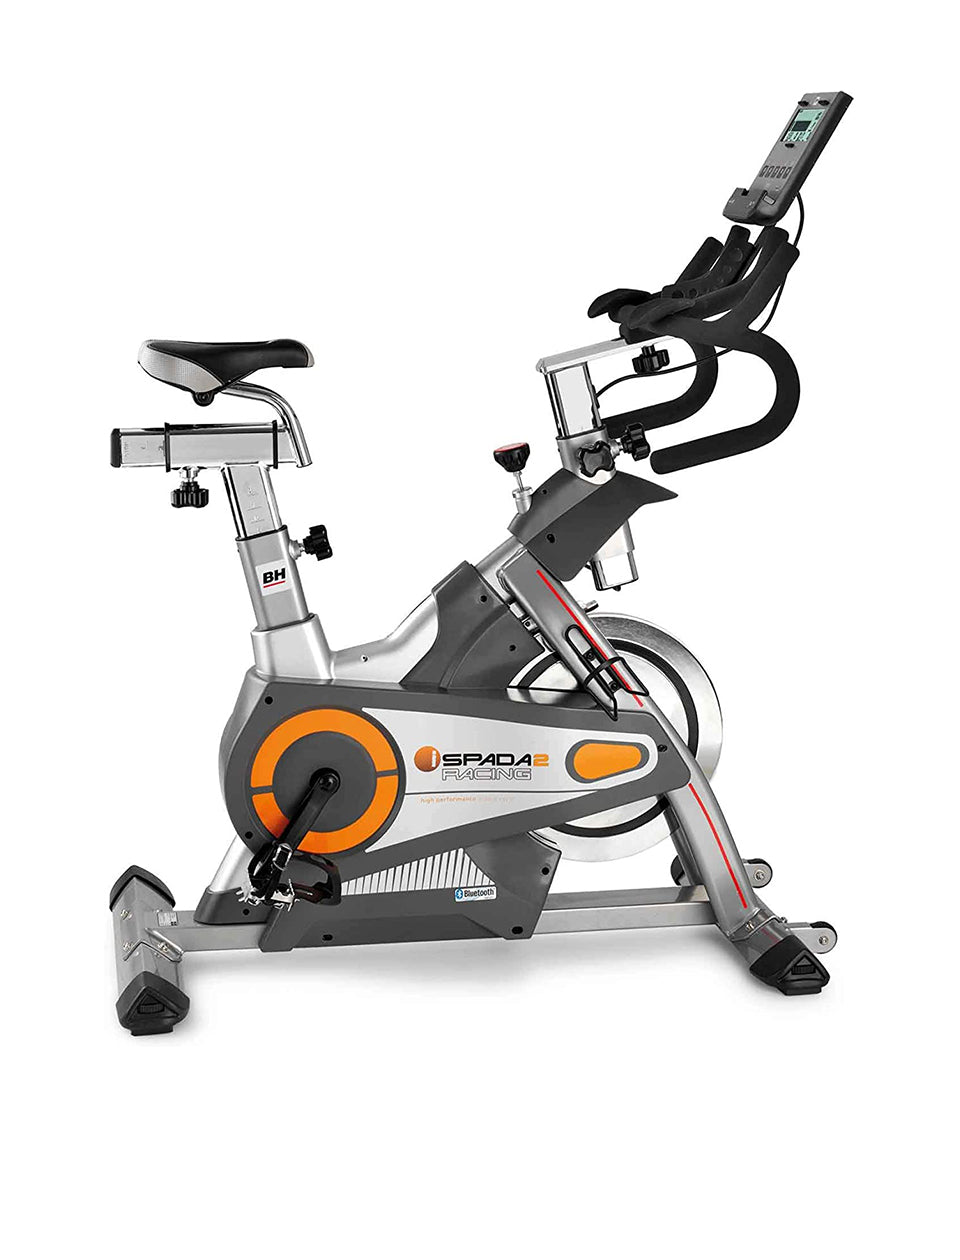 BH Fitness i.SPADA 2 RACING H9356I Indoor Bike - Magnetic and Clutch